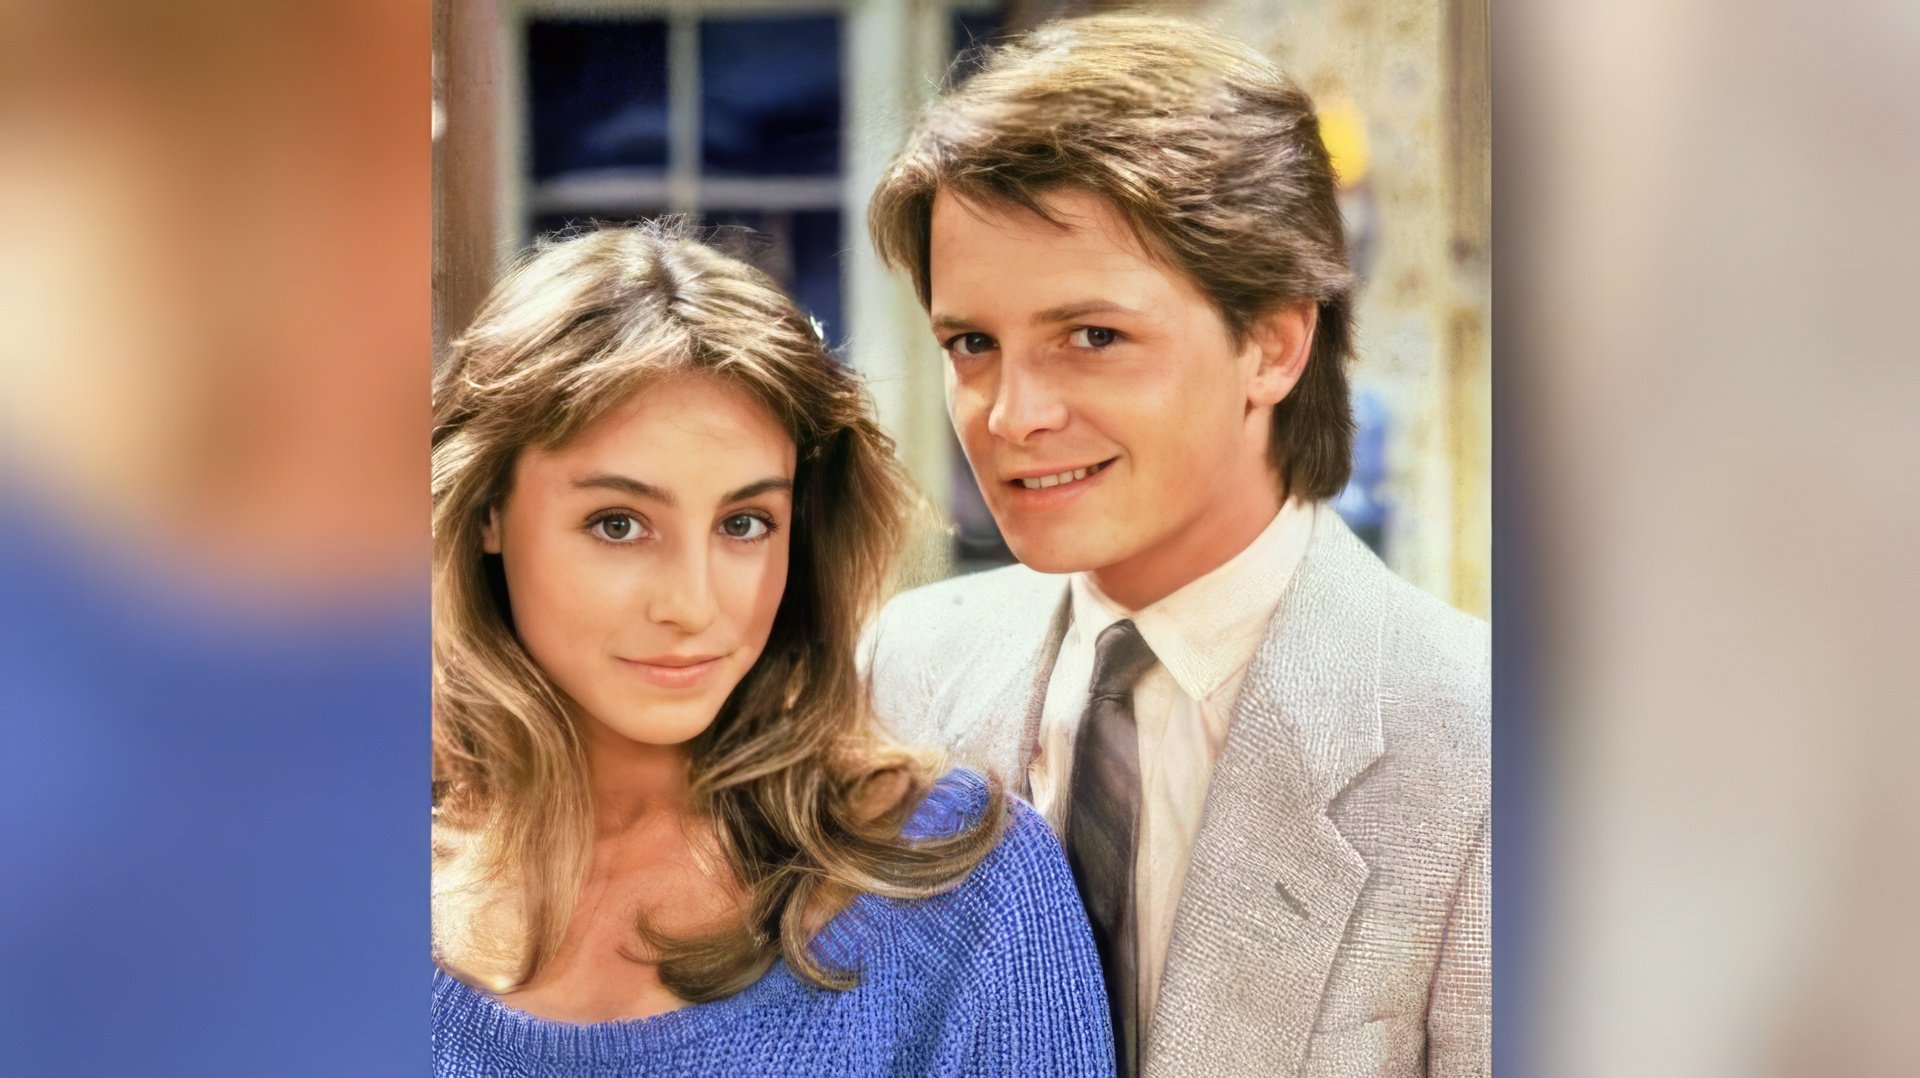 Michael and Tracy met on the set of Family Ties